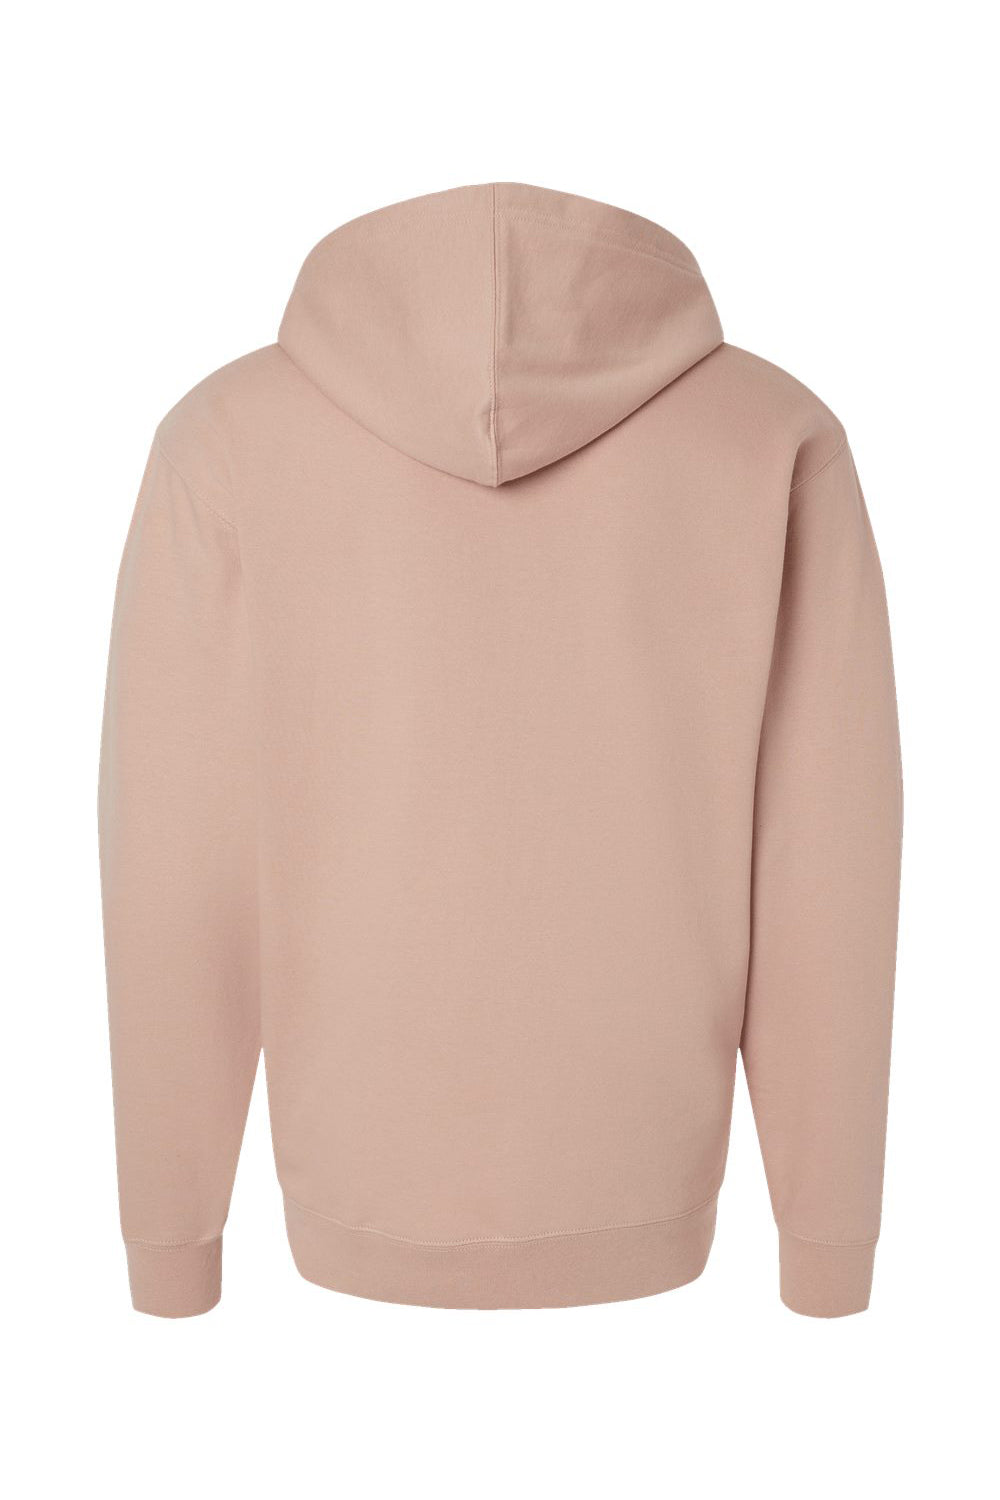 Independent Trading Co. SS4500 Mens Hooded Sweatshirt Hoodie Dusty Pink Flat Back